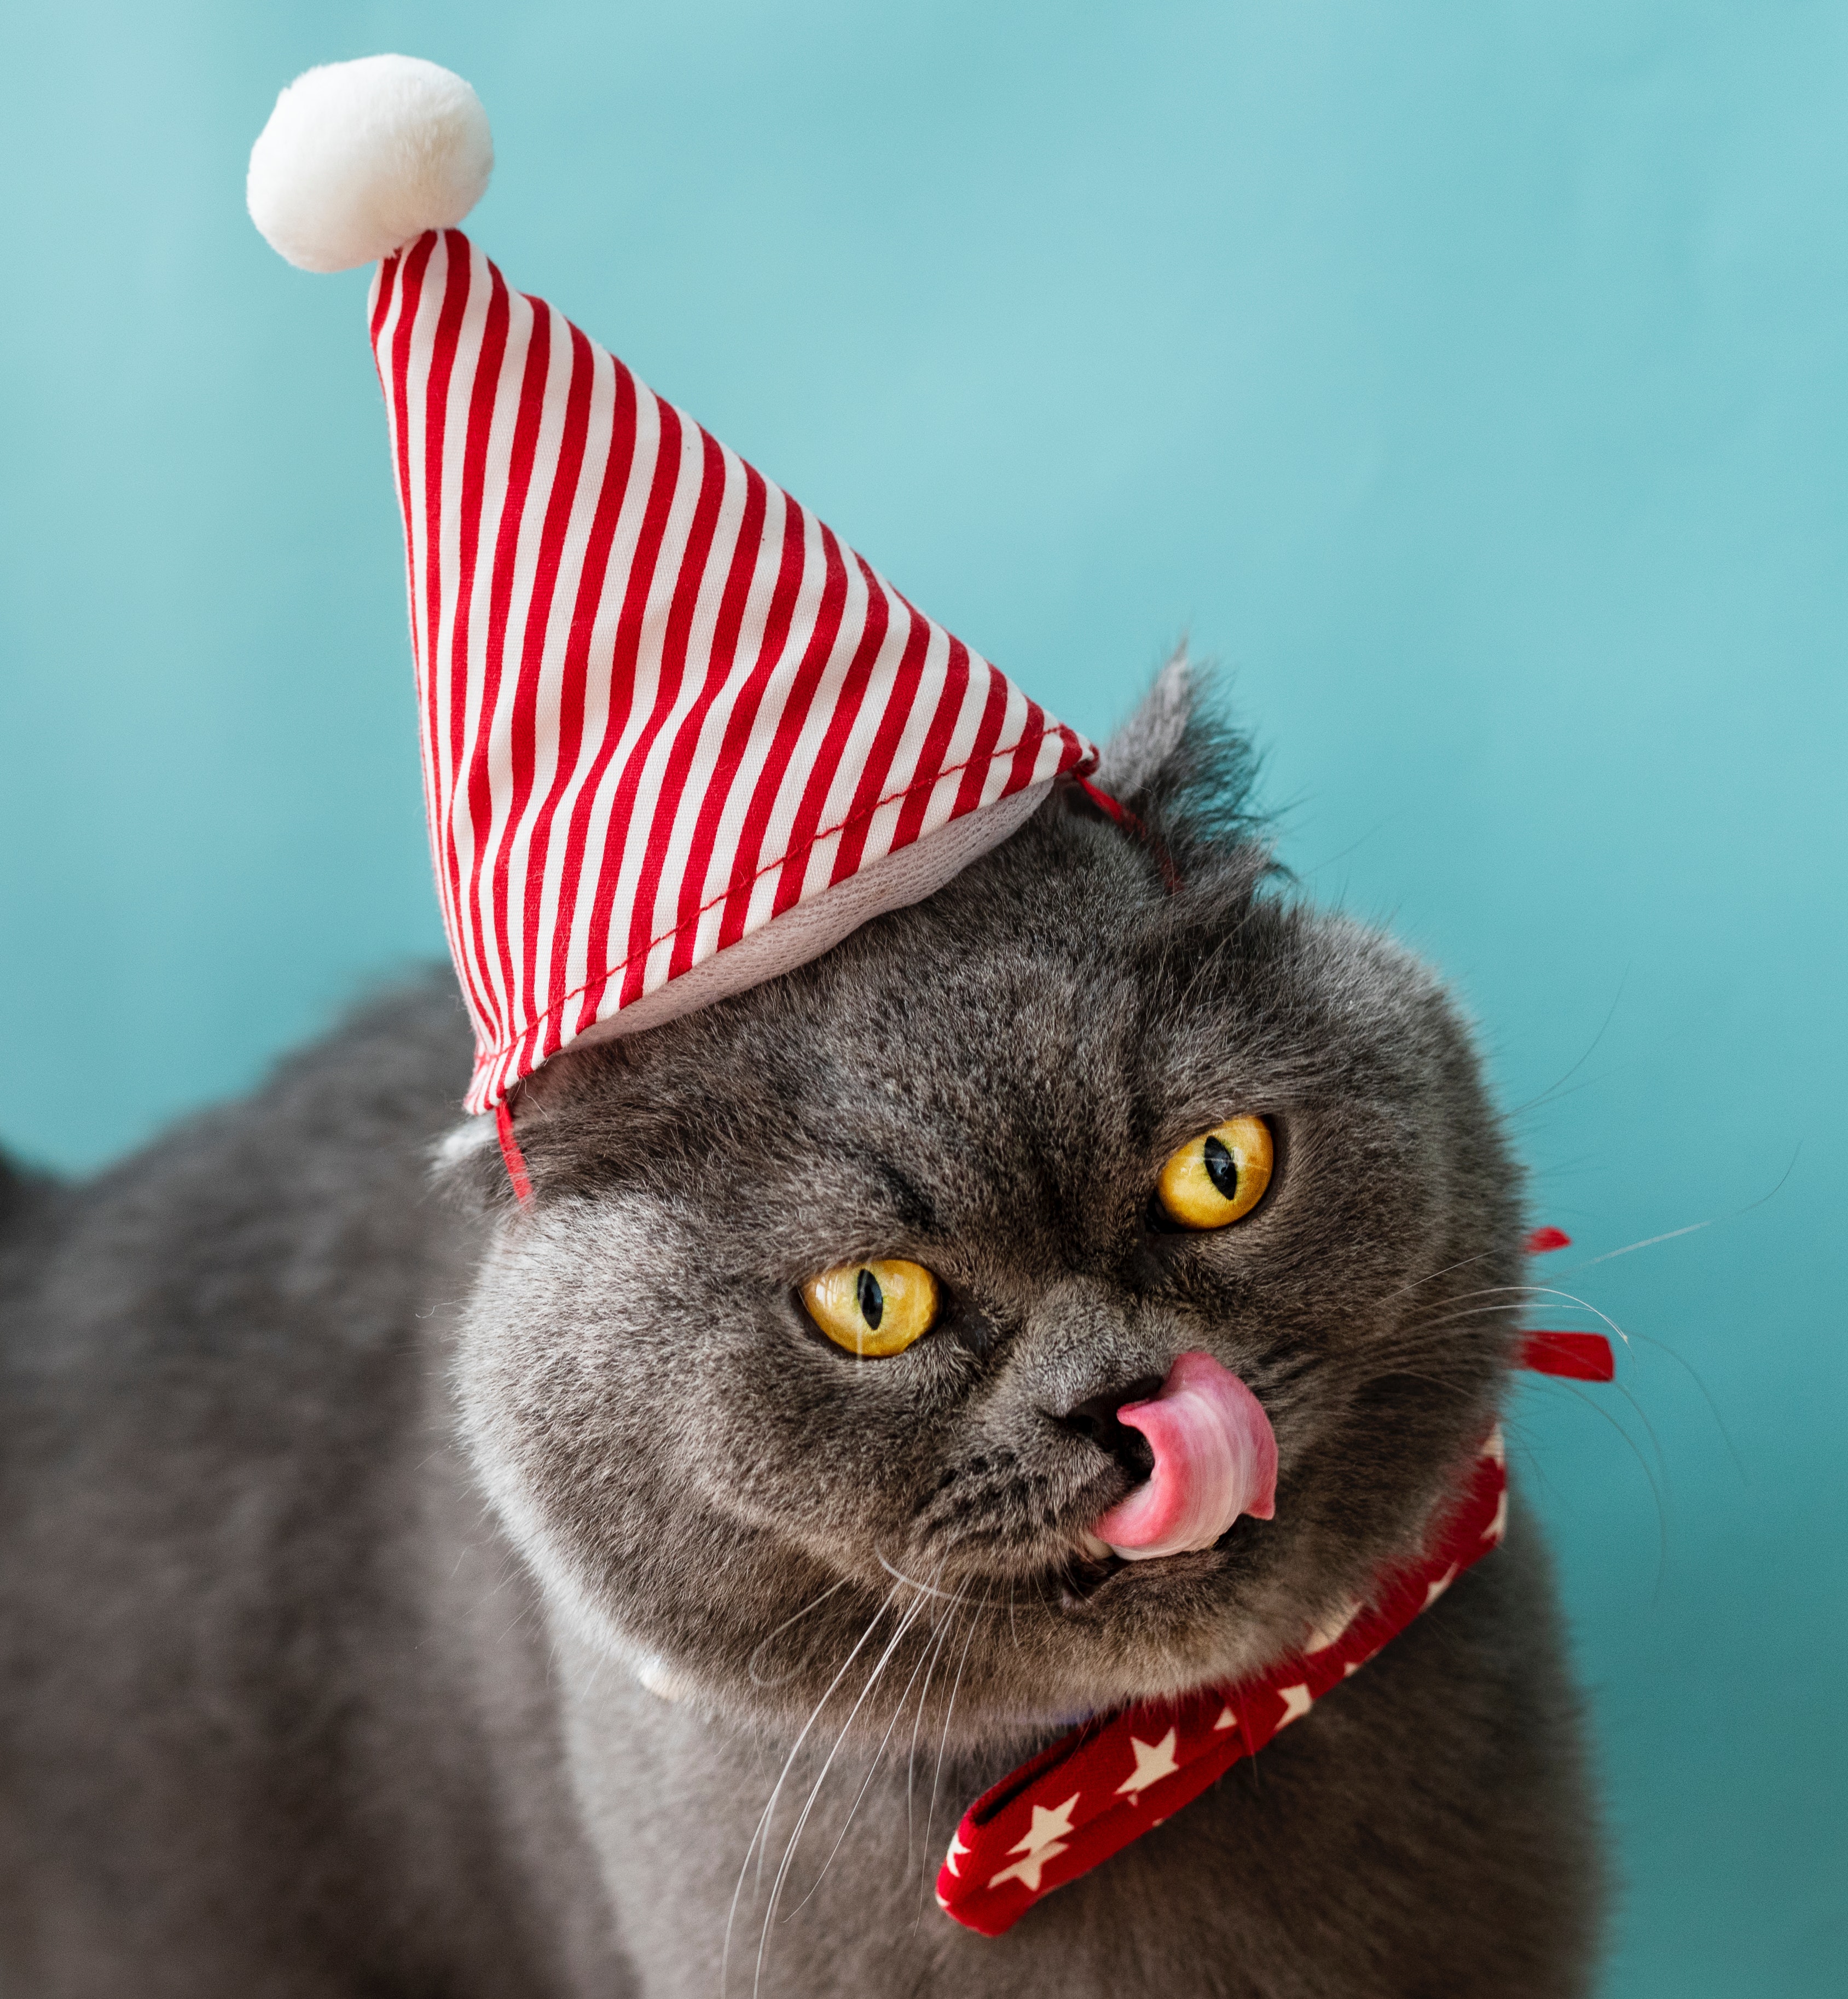 A cat wearing a party hat